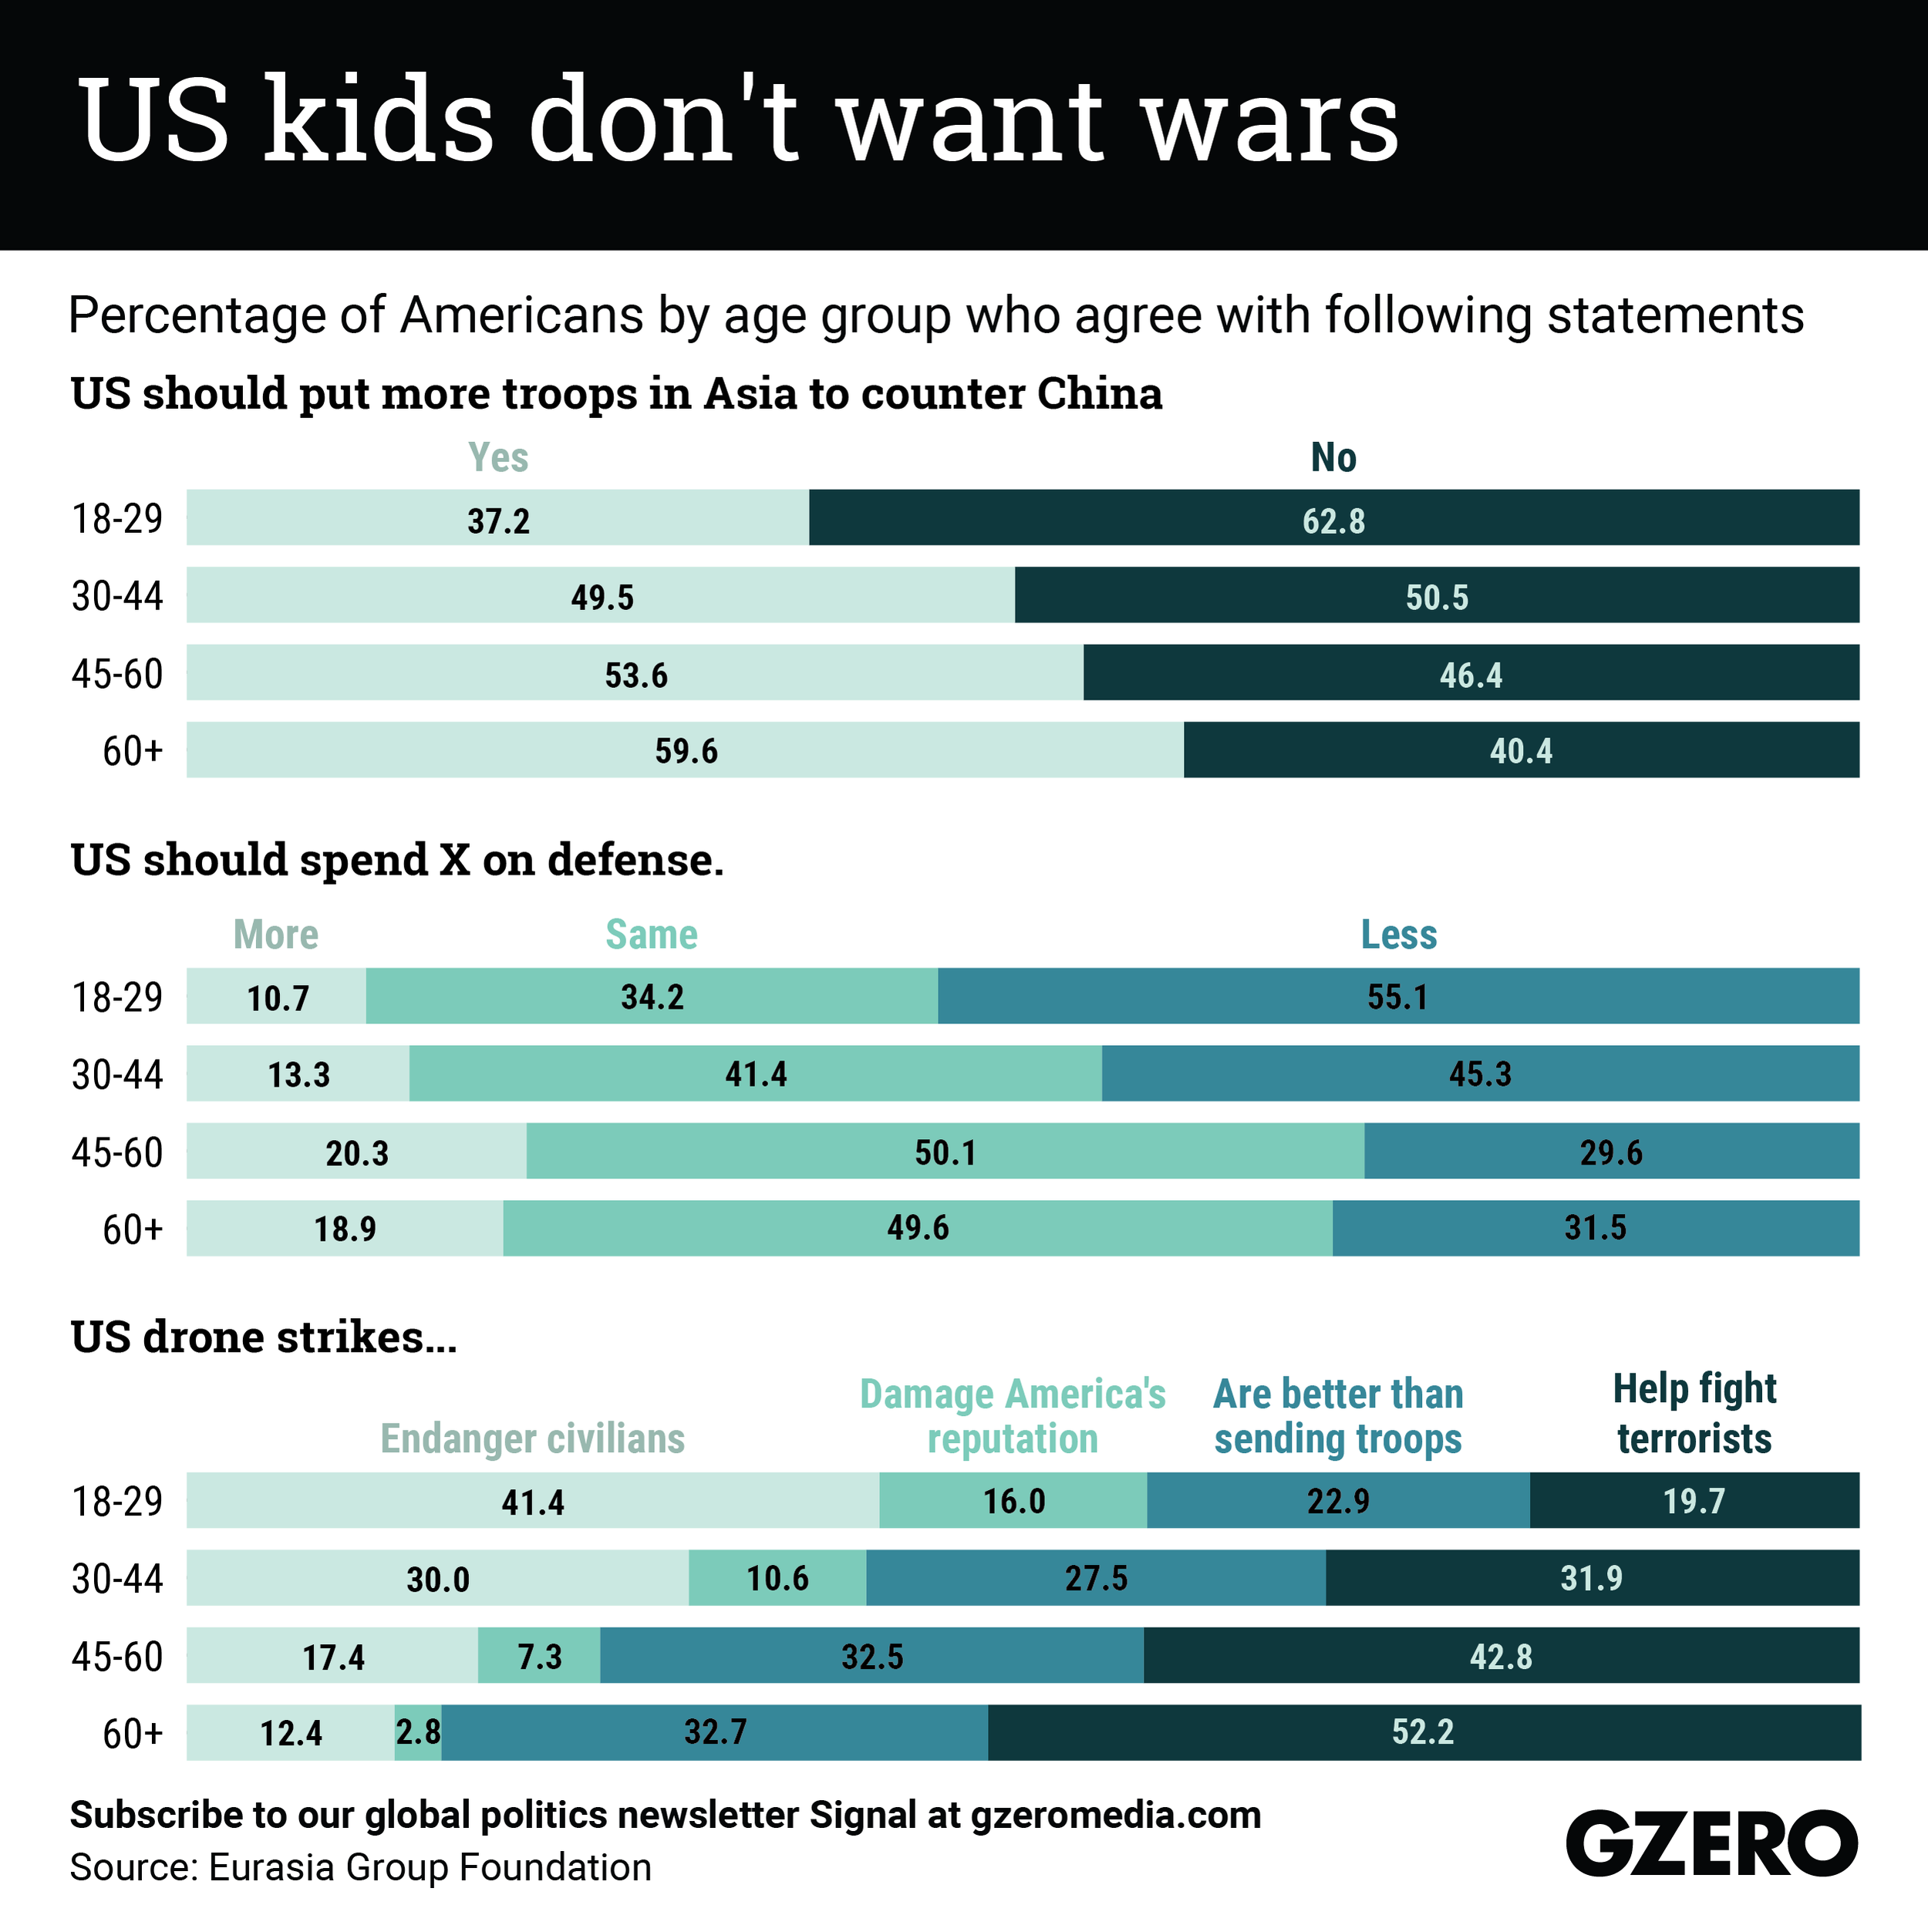 The Graphic Truth: US kids don't want wars